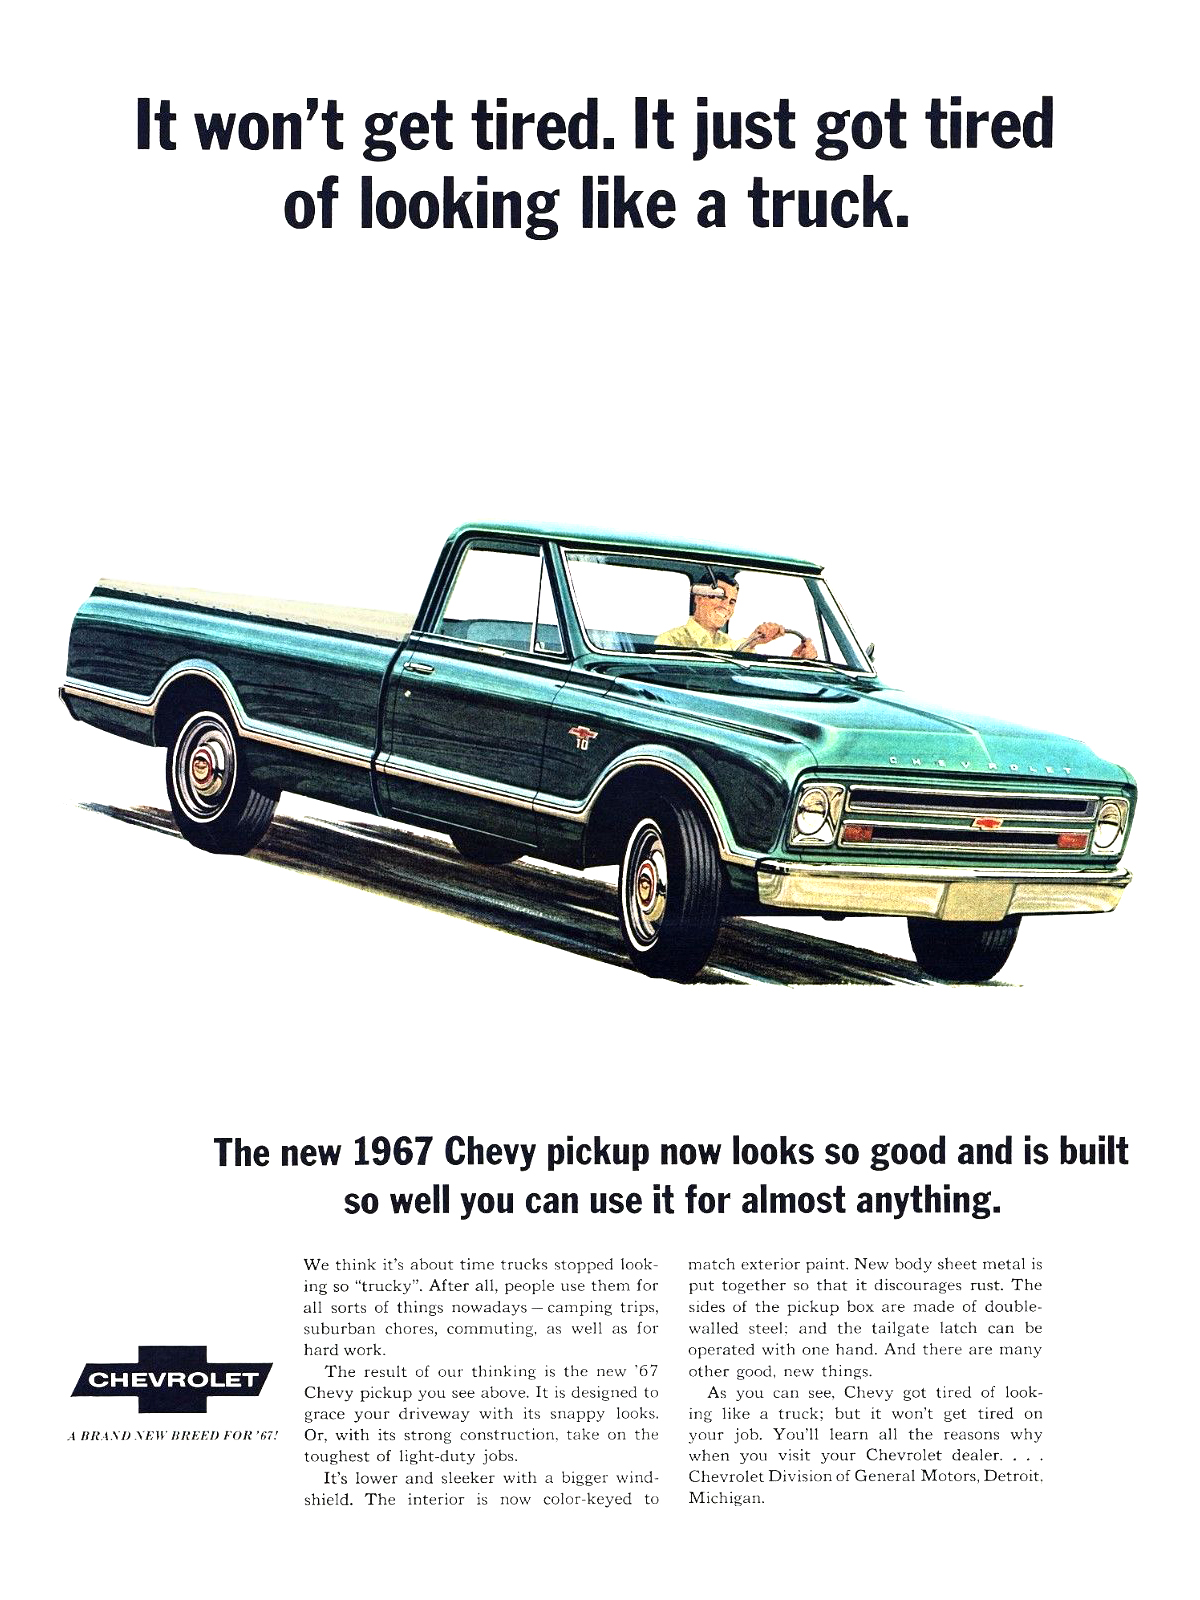 Chevrolet Fleetside Pickup Ad (1967): It won't get tired. It just got tired of looking like a truck.